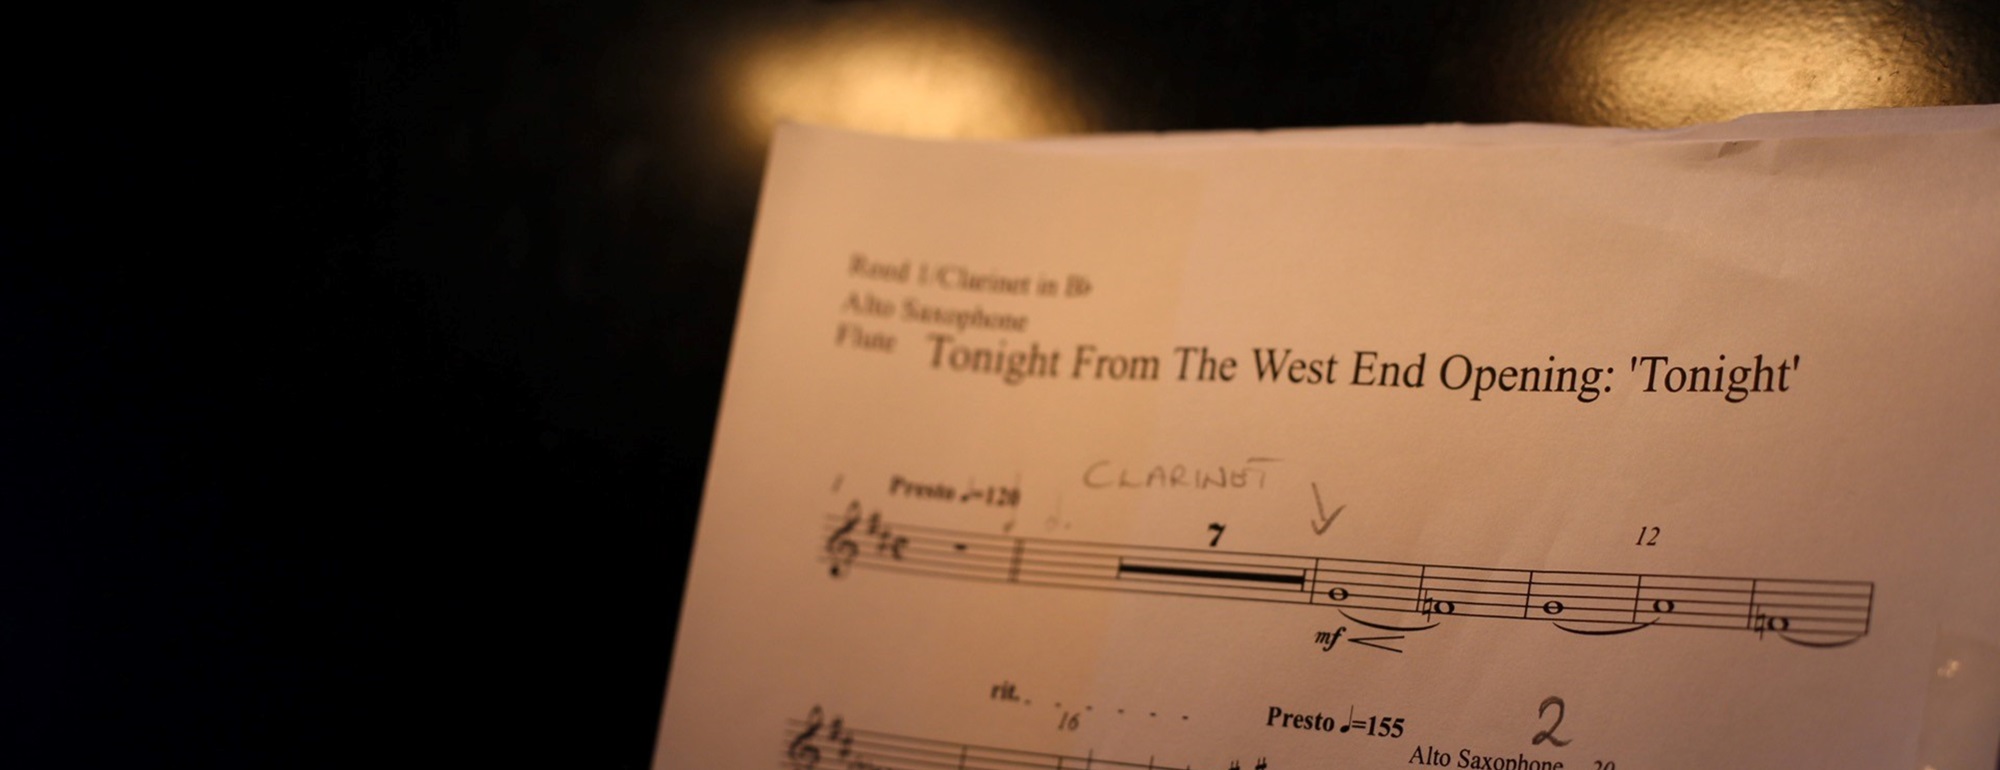 Sheet music with Tonight From The West End printed on it.